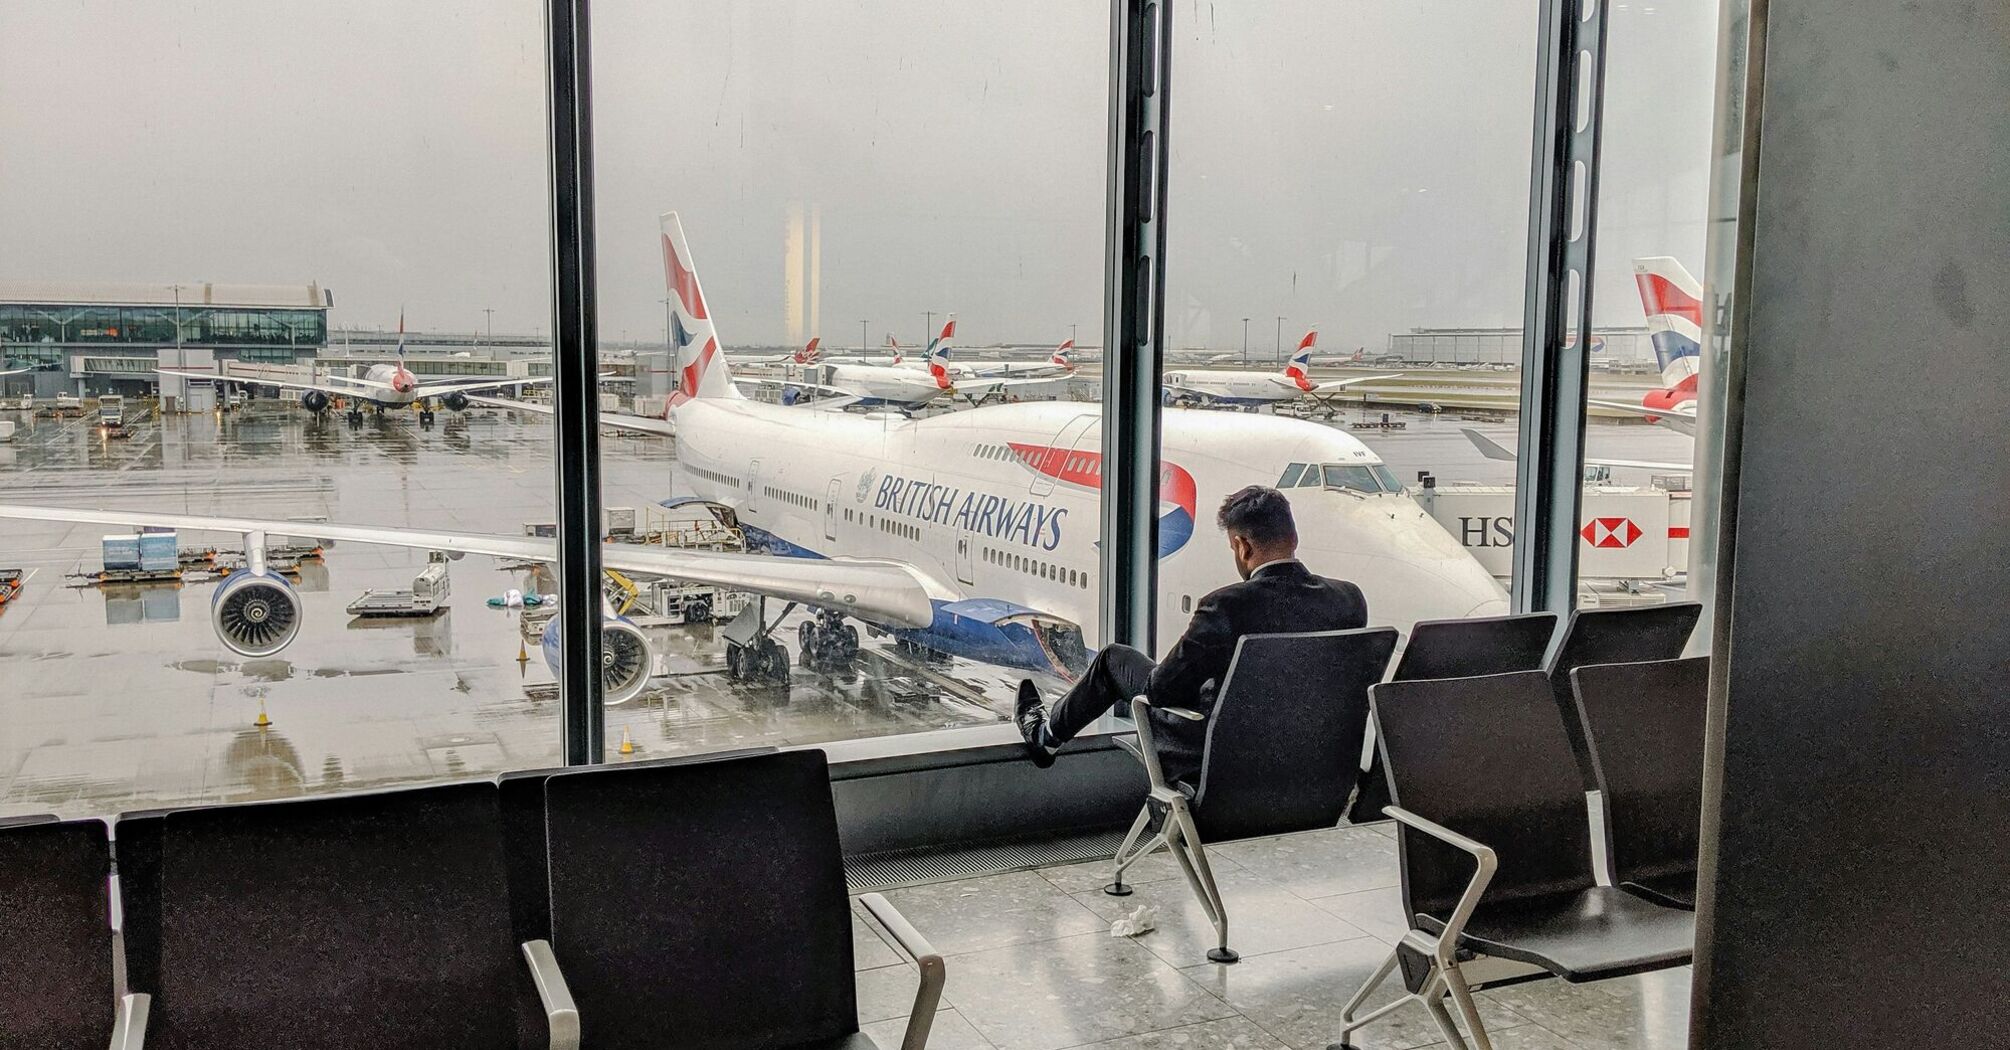 Man in blue shirt sitting on black chair in the London airport